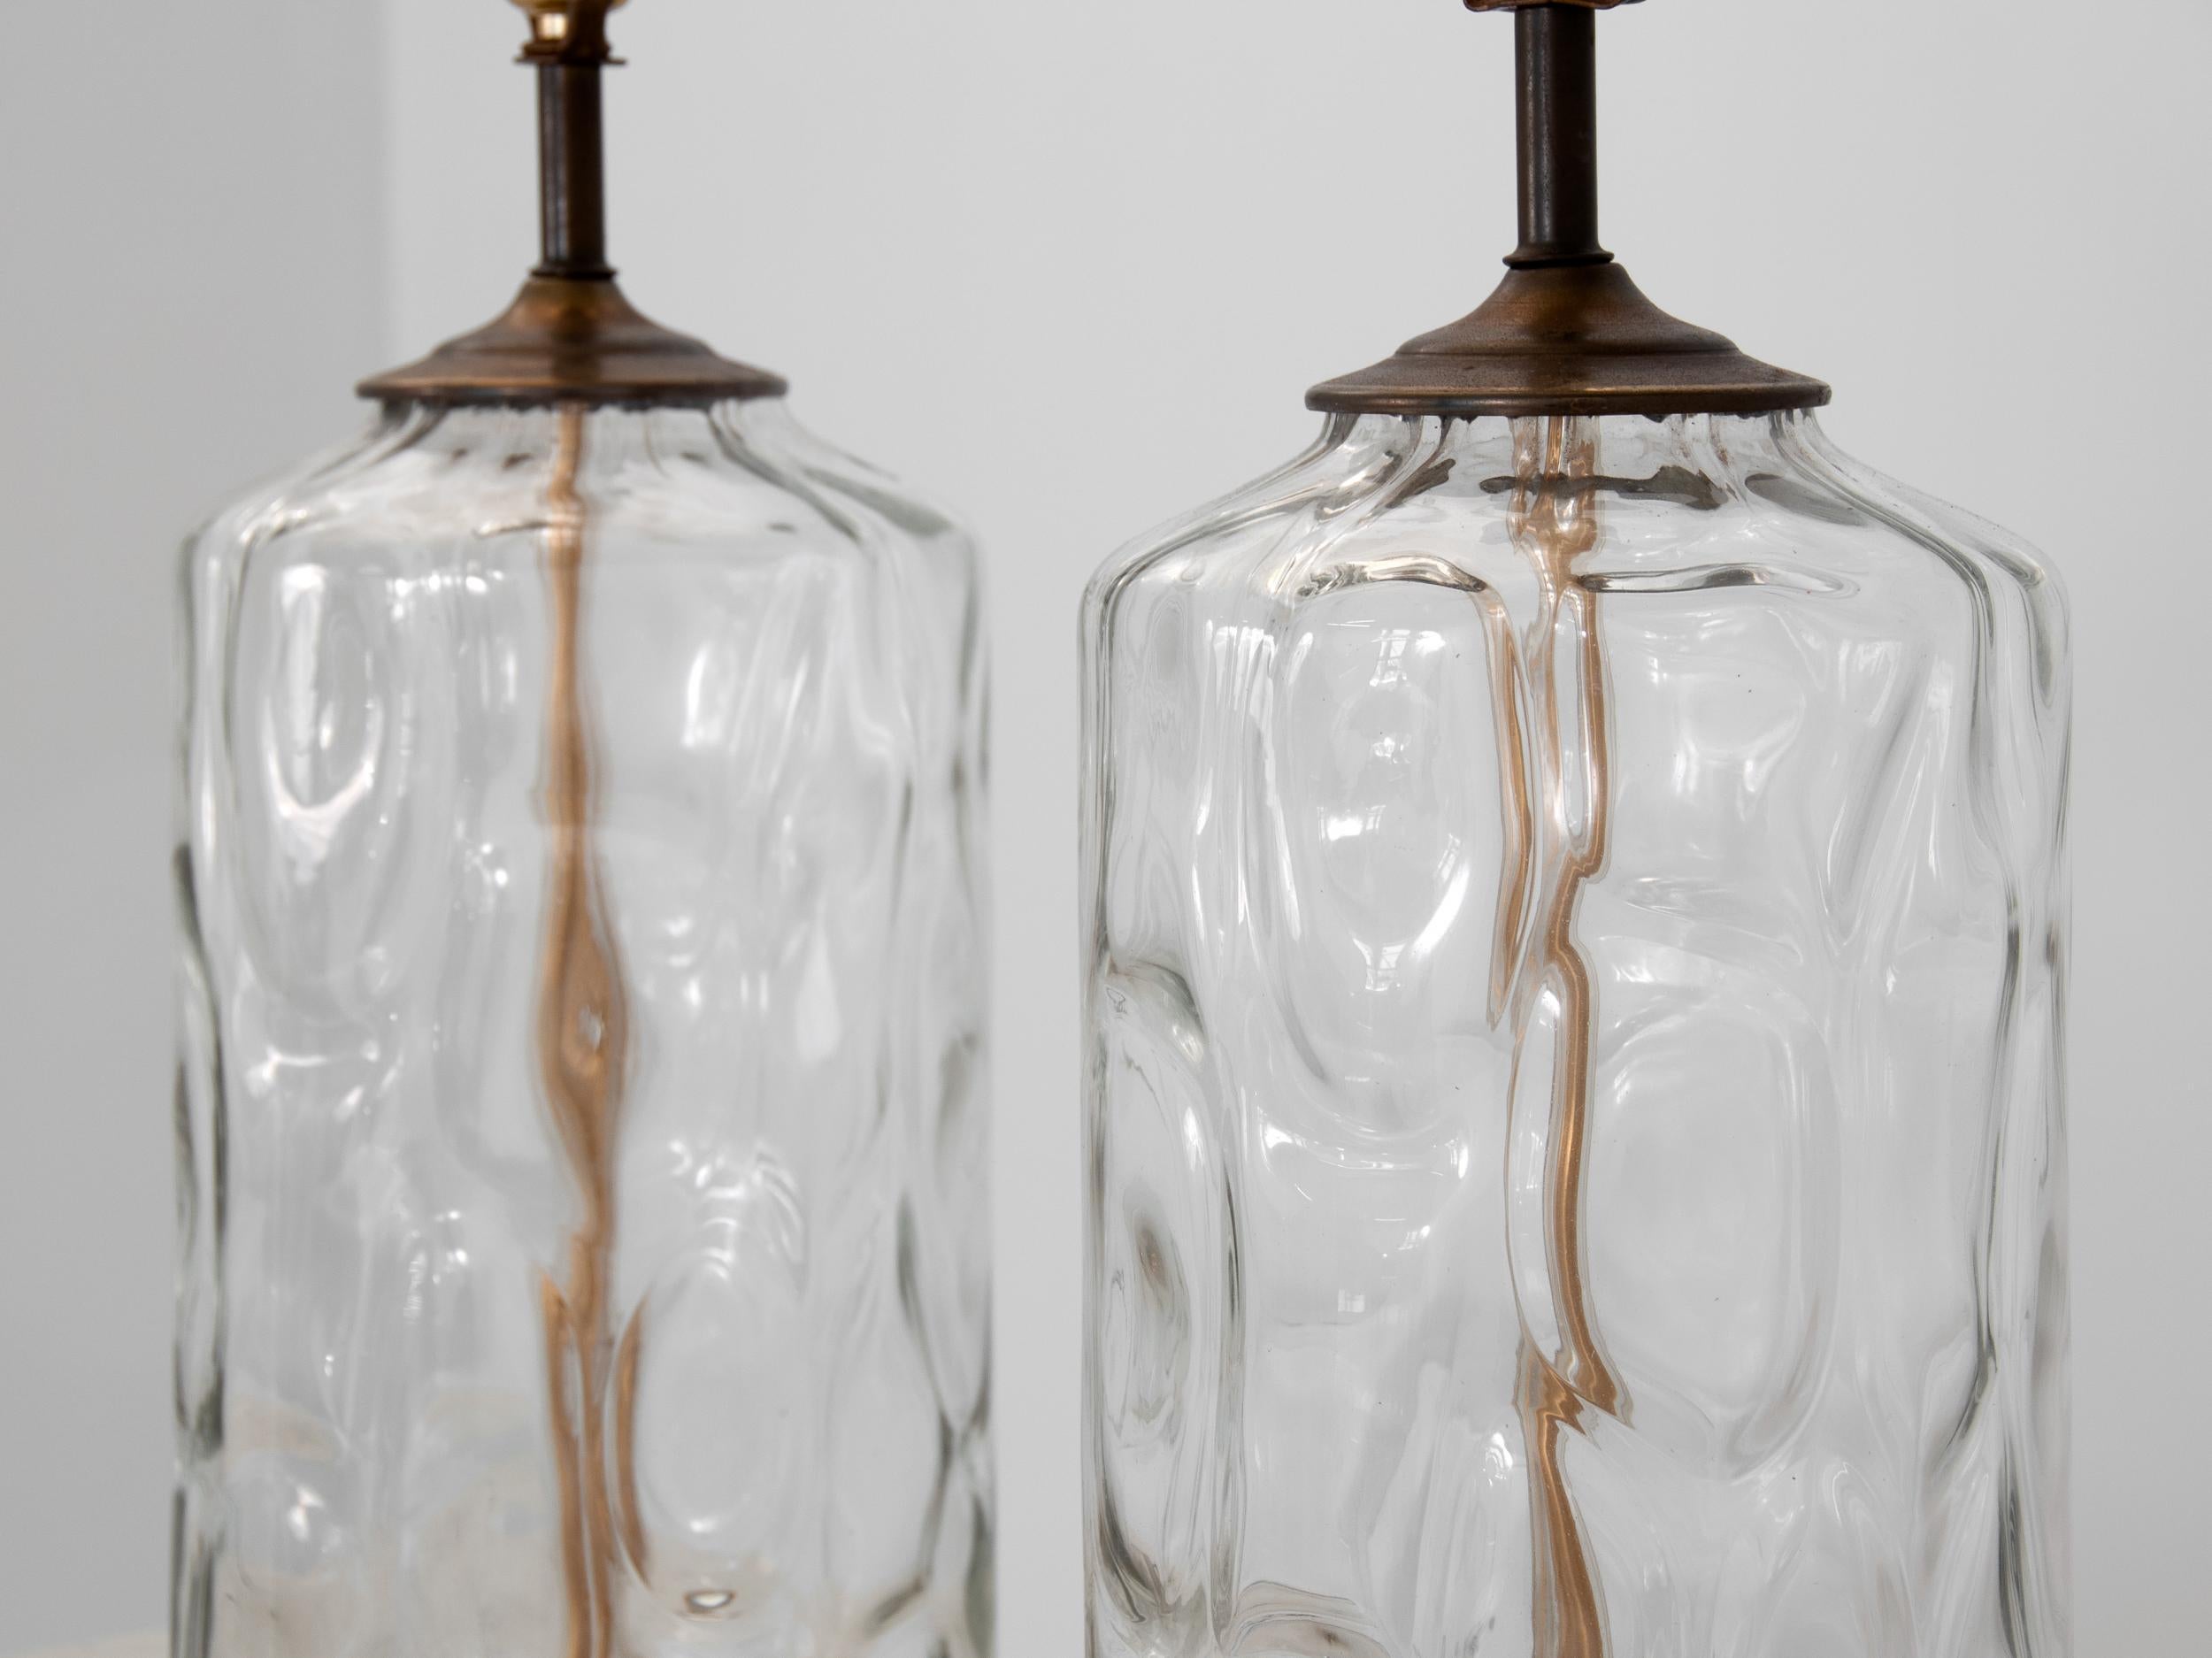 Vintage hand blown lamps with brass and wood base.